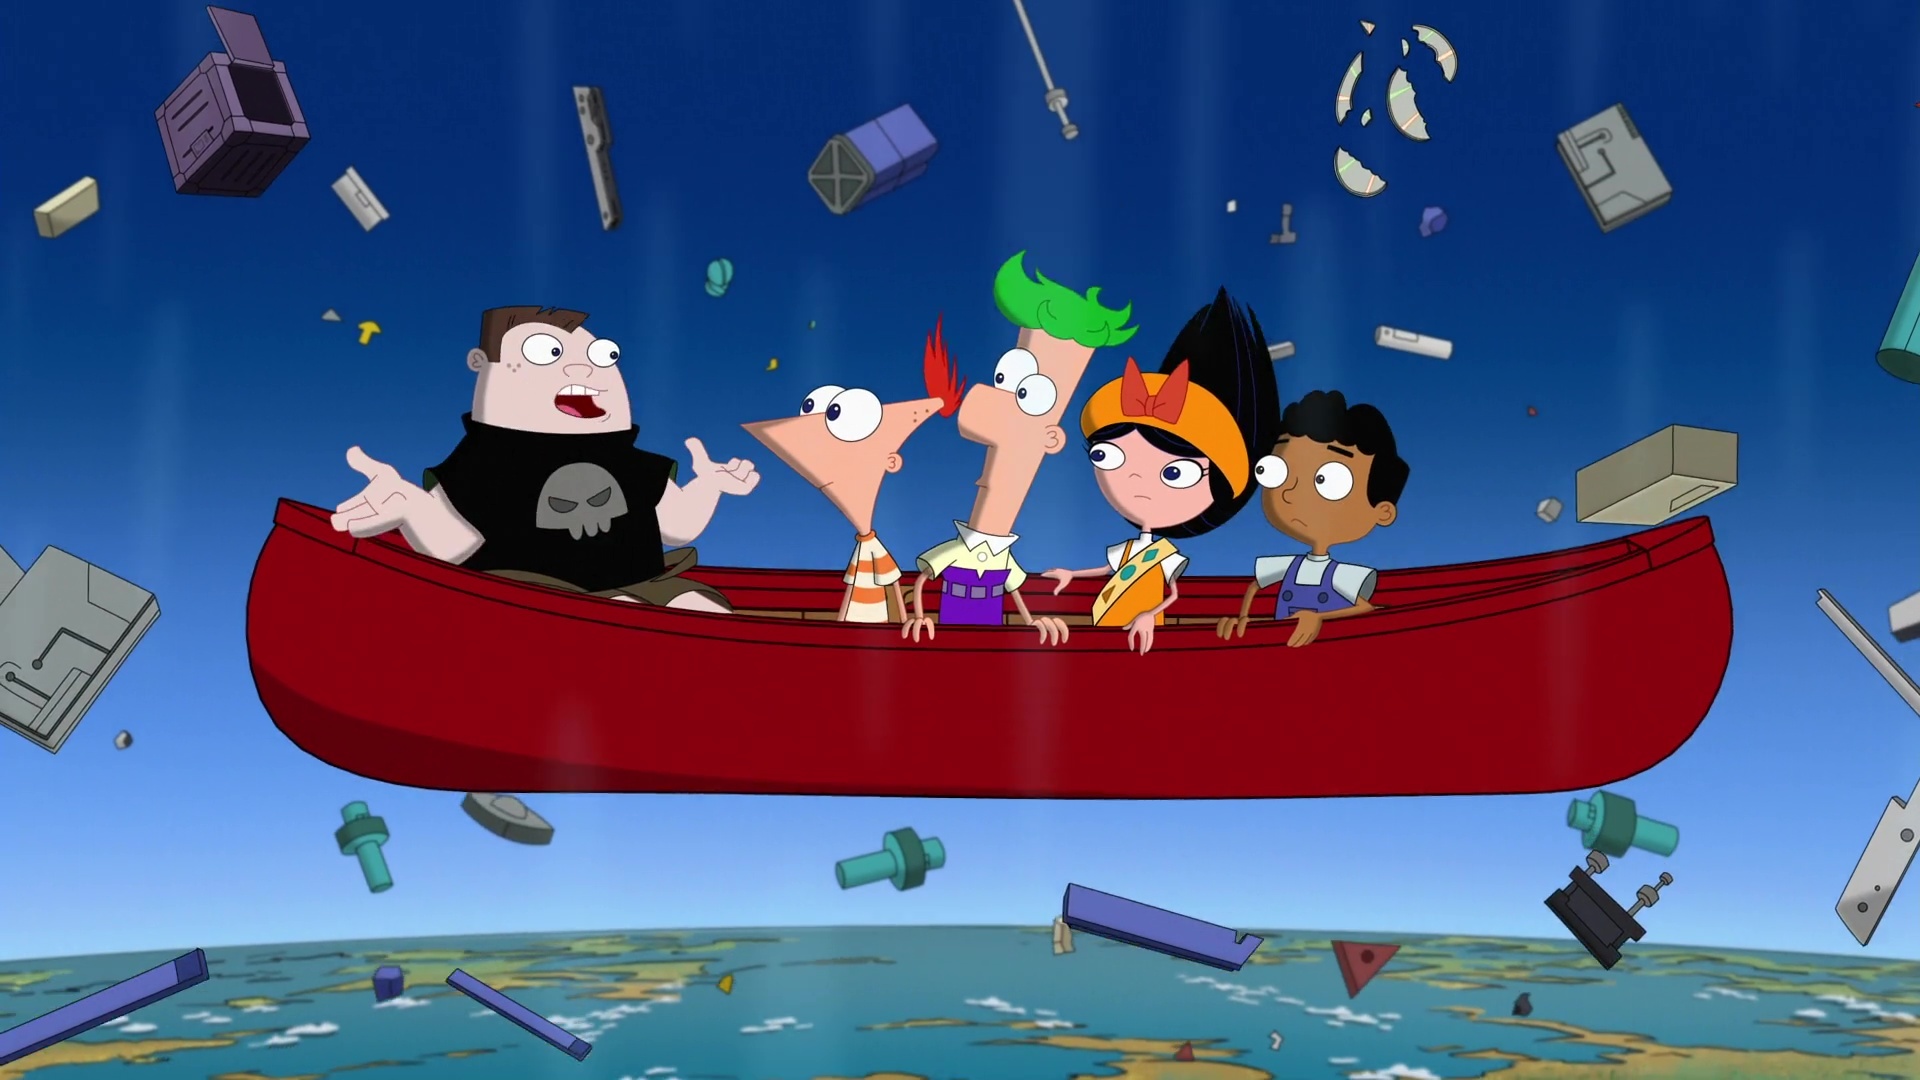 Phineas and Ferb the Movie, Candace's adventure, English subtitles, Movie download, 1920x1080 Full HD Desktop